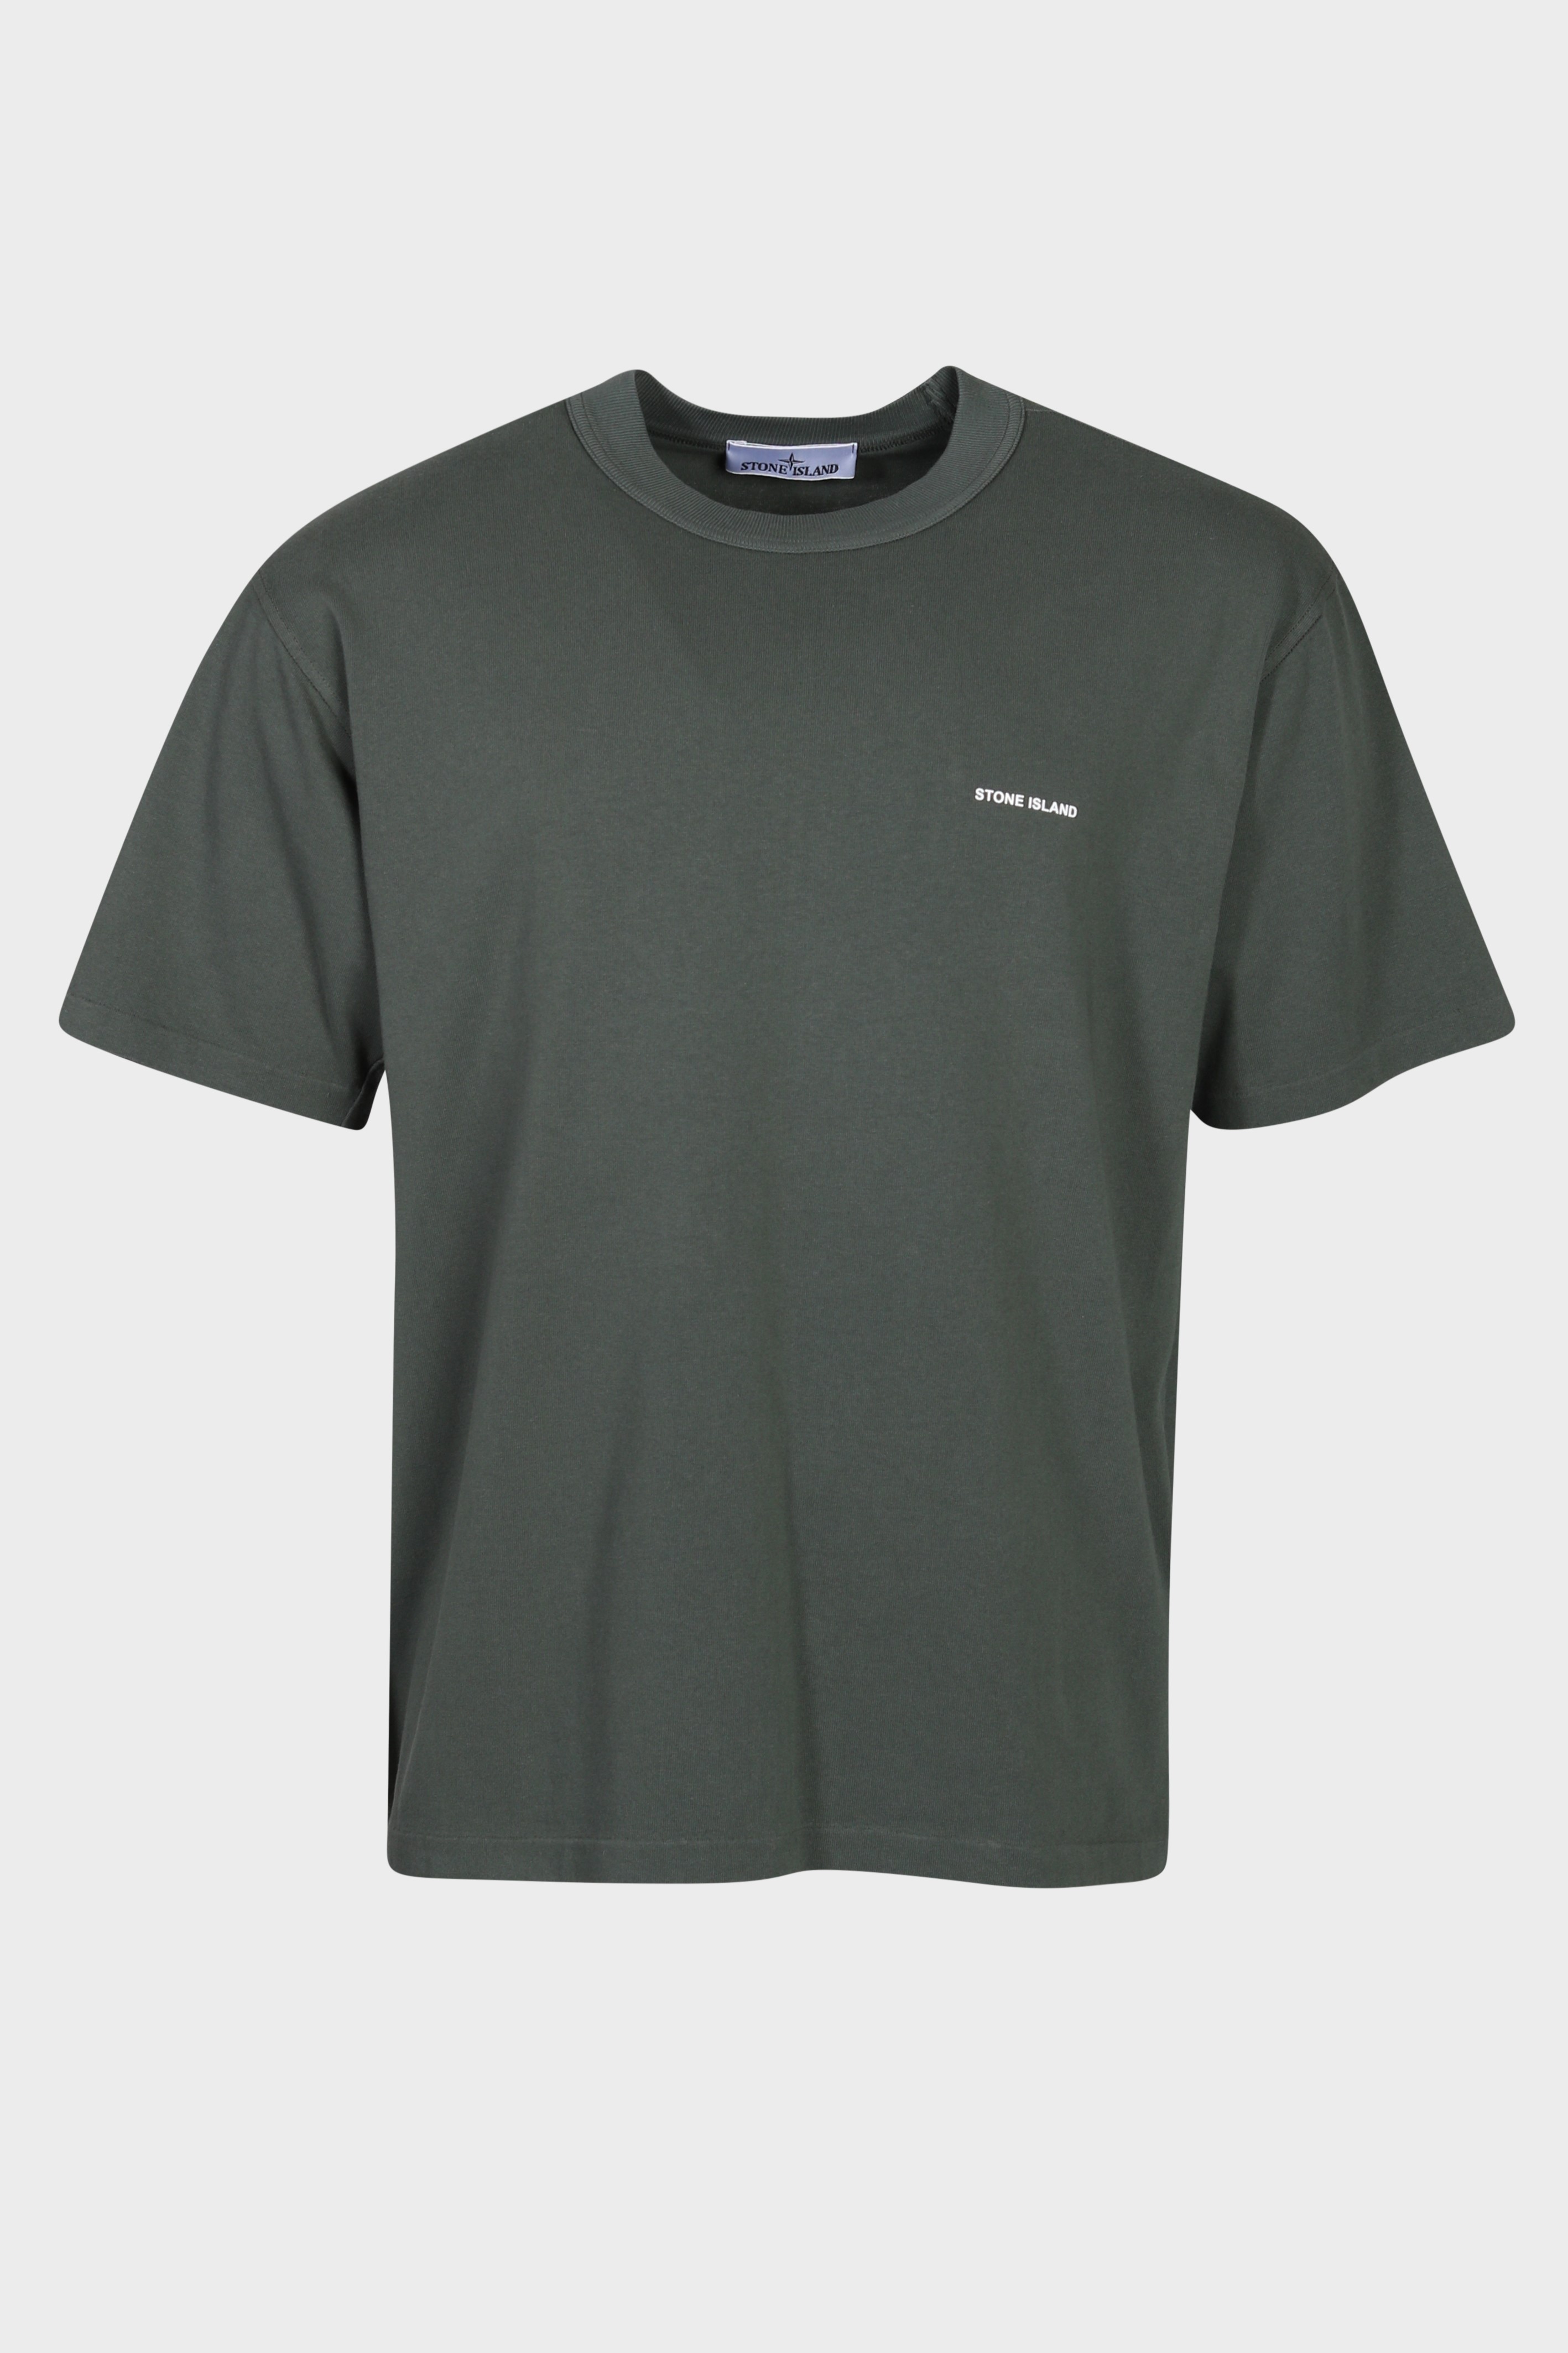 STONE ISLAND Stamp T-Shirt in Green S